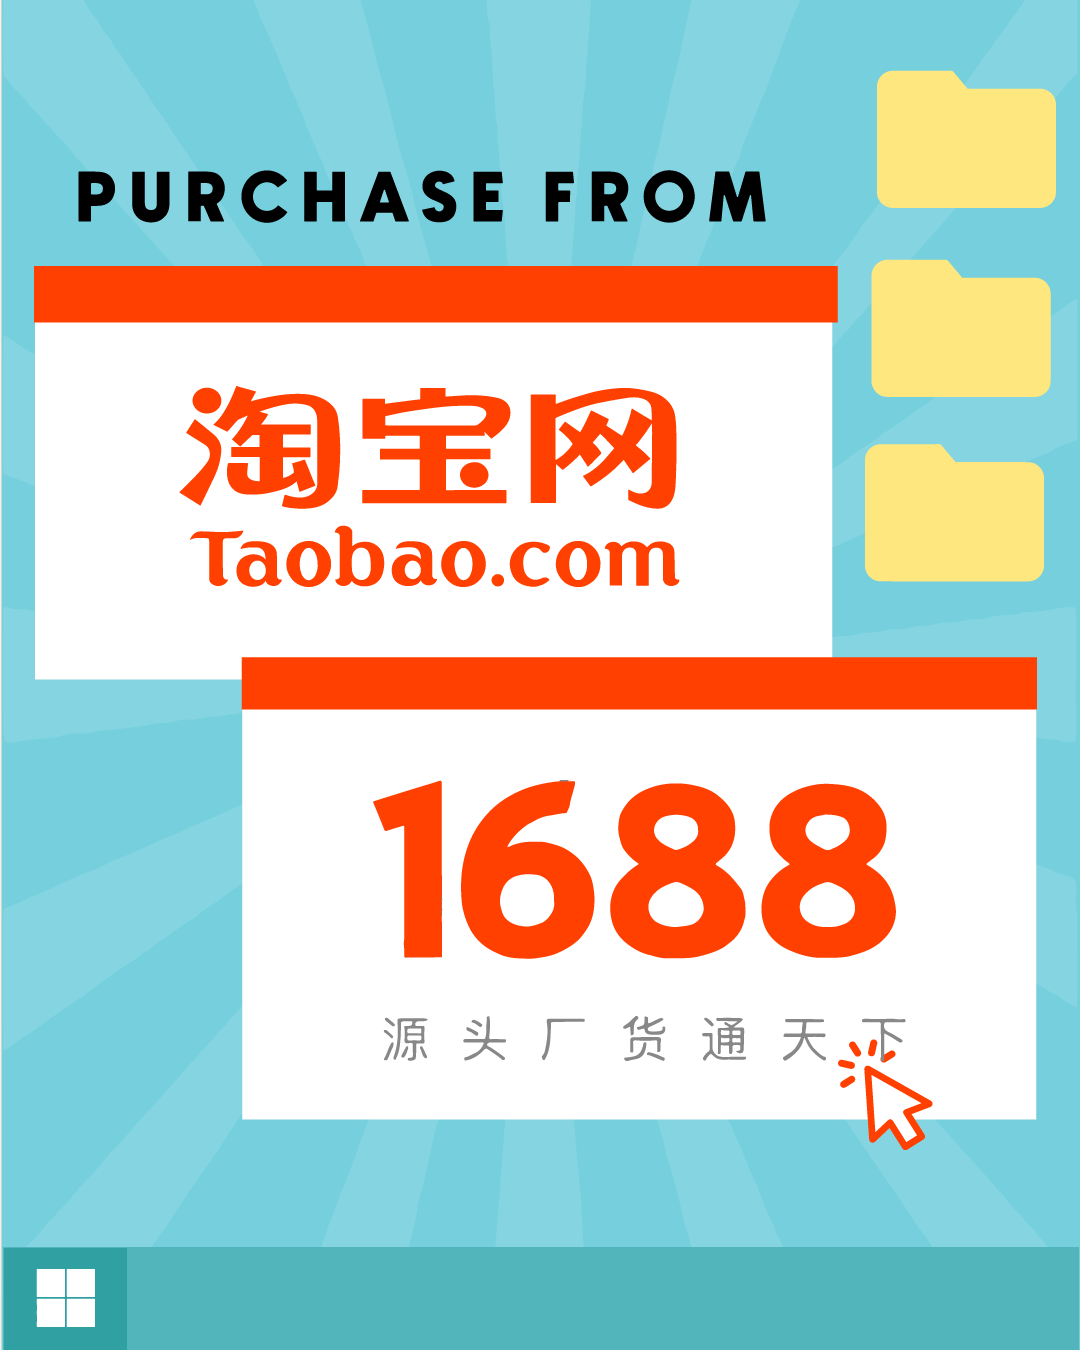 Purchase from TAOBAO/1688.com